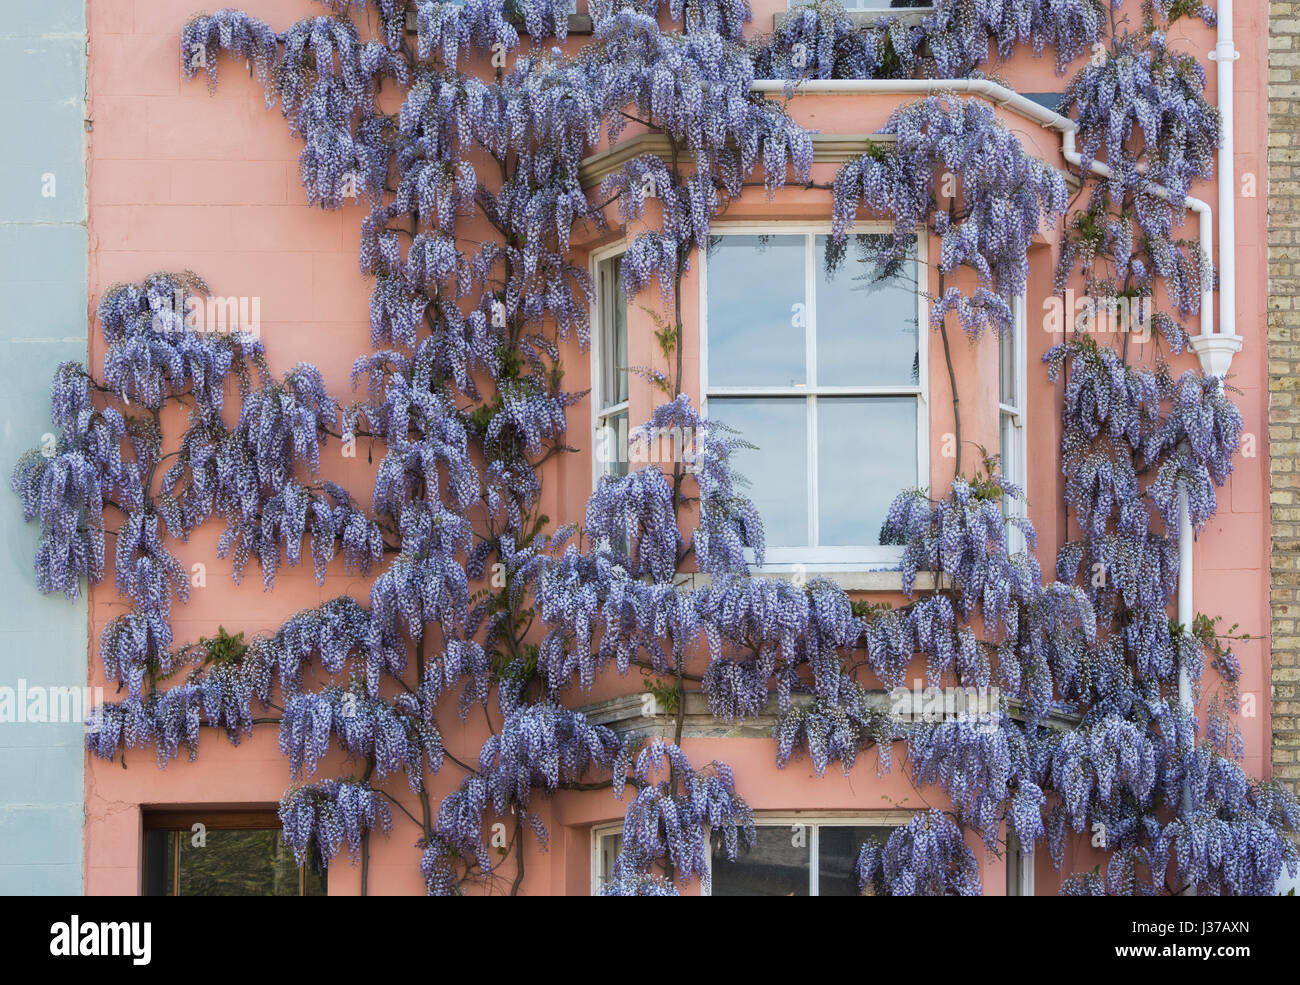 Wisteria on the front of a residential house in Iffley road, Oxford, Oxfordshire, UK Stock Photo